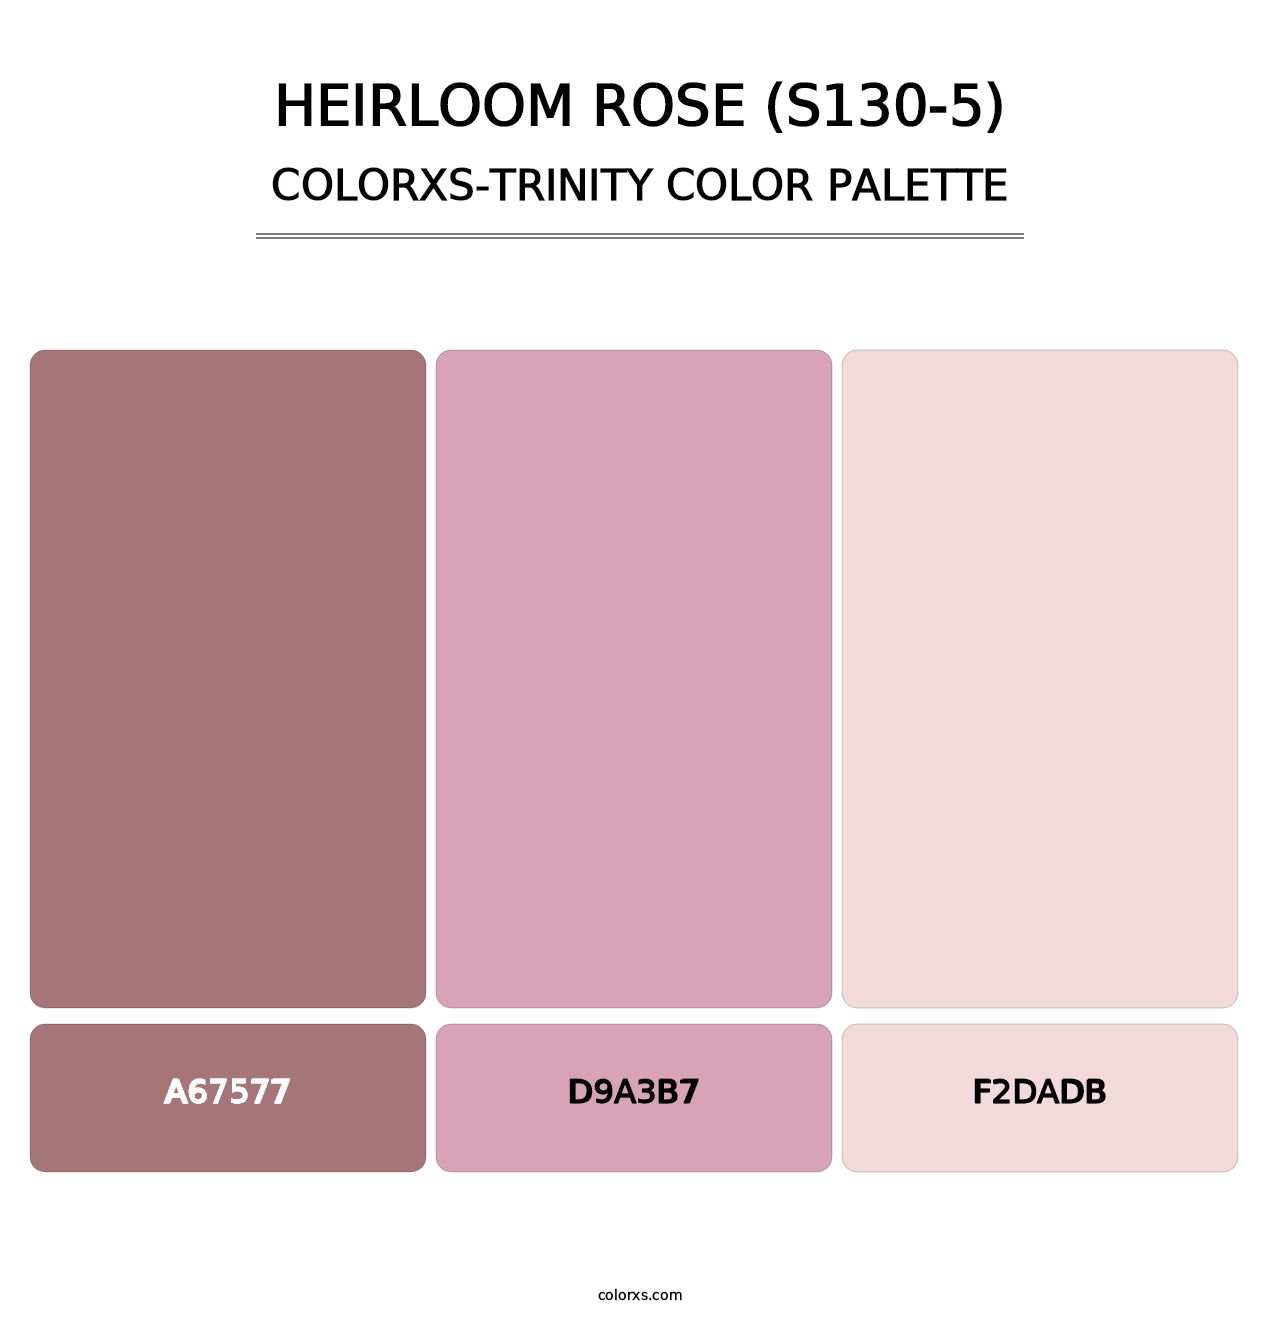 Heirloom Rose (S130-5) - Colorxs Trinity Palette